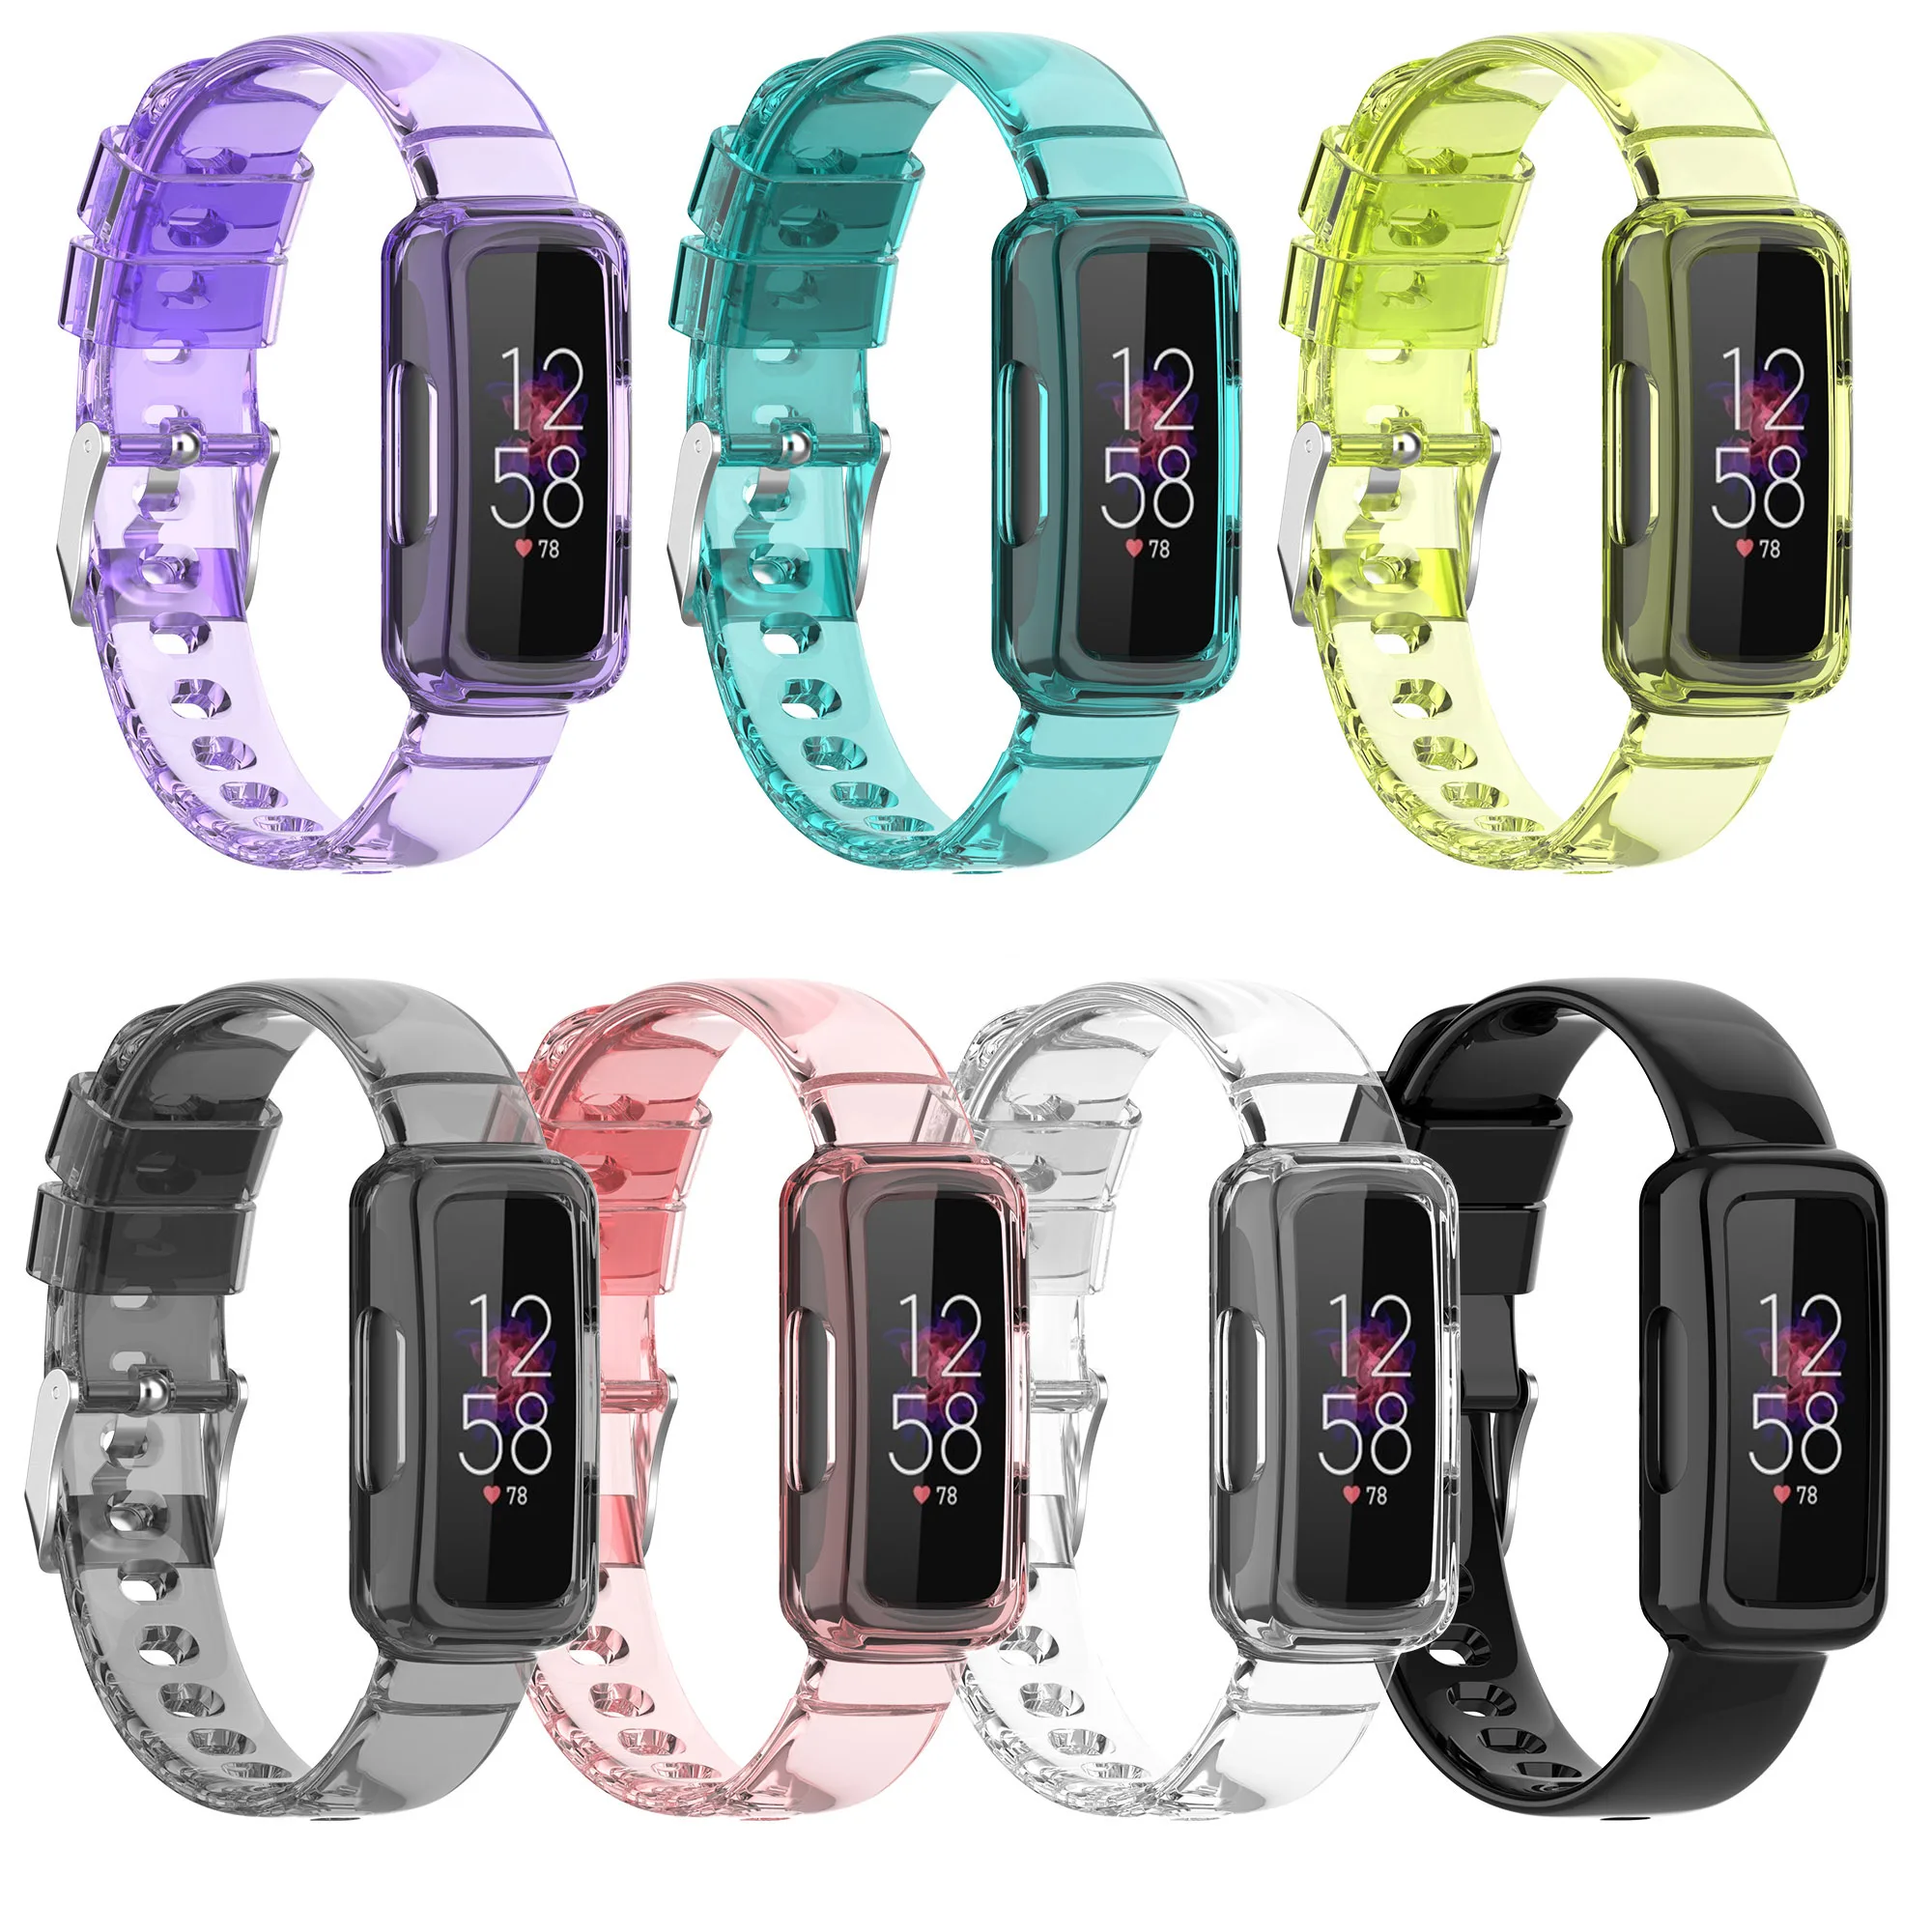 

TPU Soft Frame Transparent Wrist Strap Case For Fitbit Luxe/Inspire HR/Ace 2/3 inspire2 Ace3 Smart Band Wristband Bumper Cover